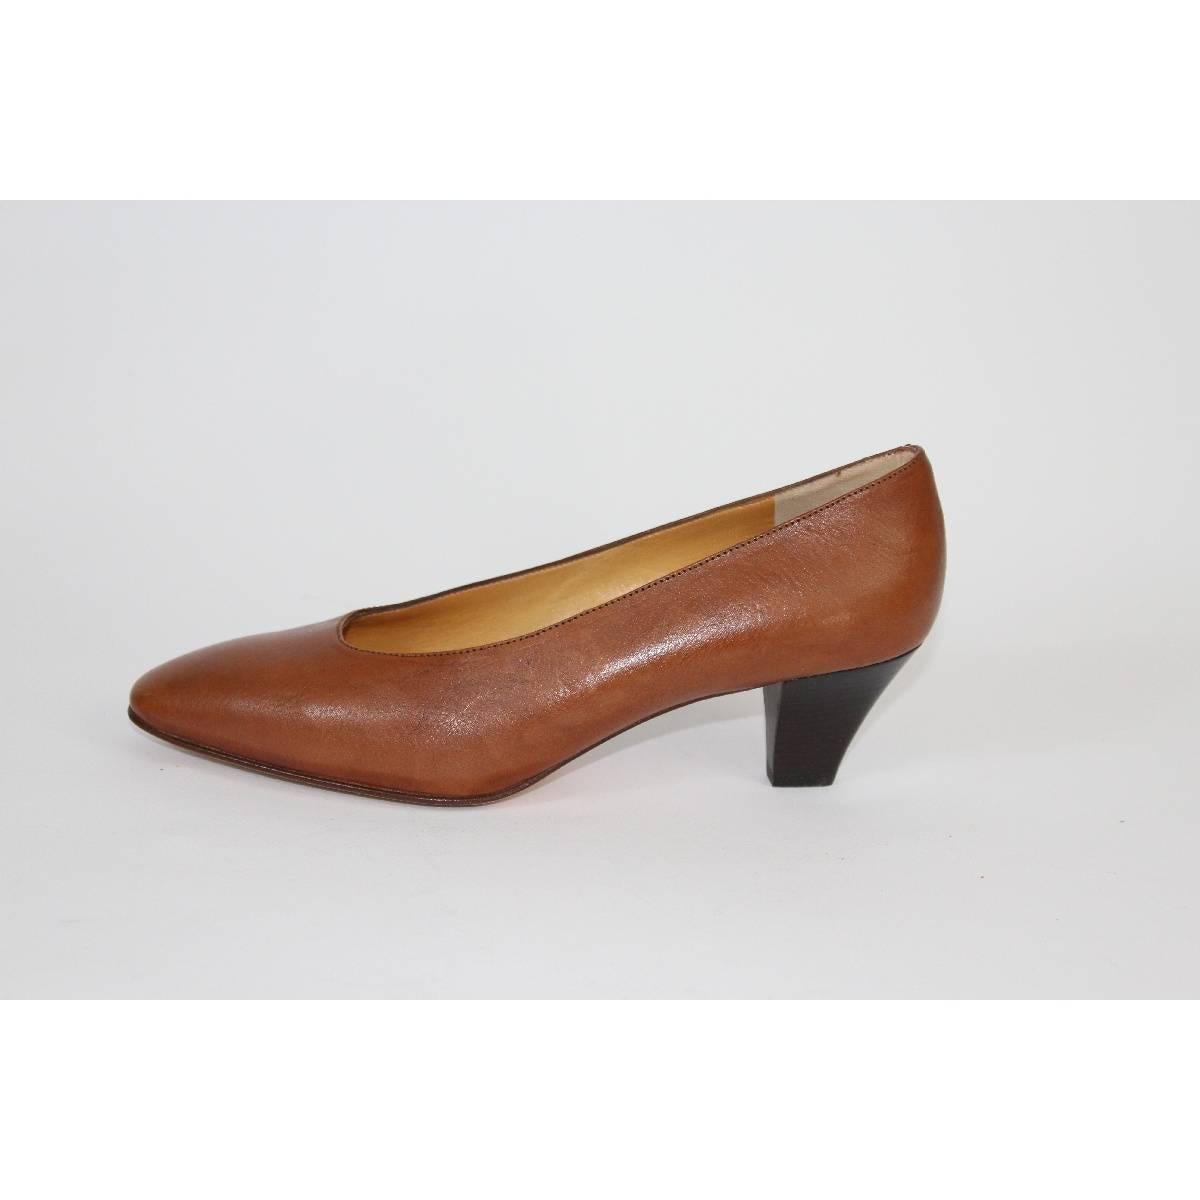 Arfango brown leather for women with small heel, size 39 1/2 it, rounded toe, new never used.

Size 39 1/2 (It)

Heel height: 6 cm

Composition: leather
Color: brown
Condition: new never used